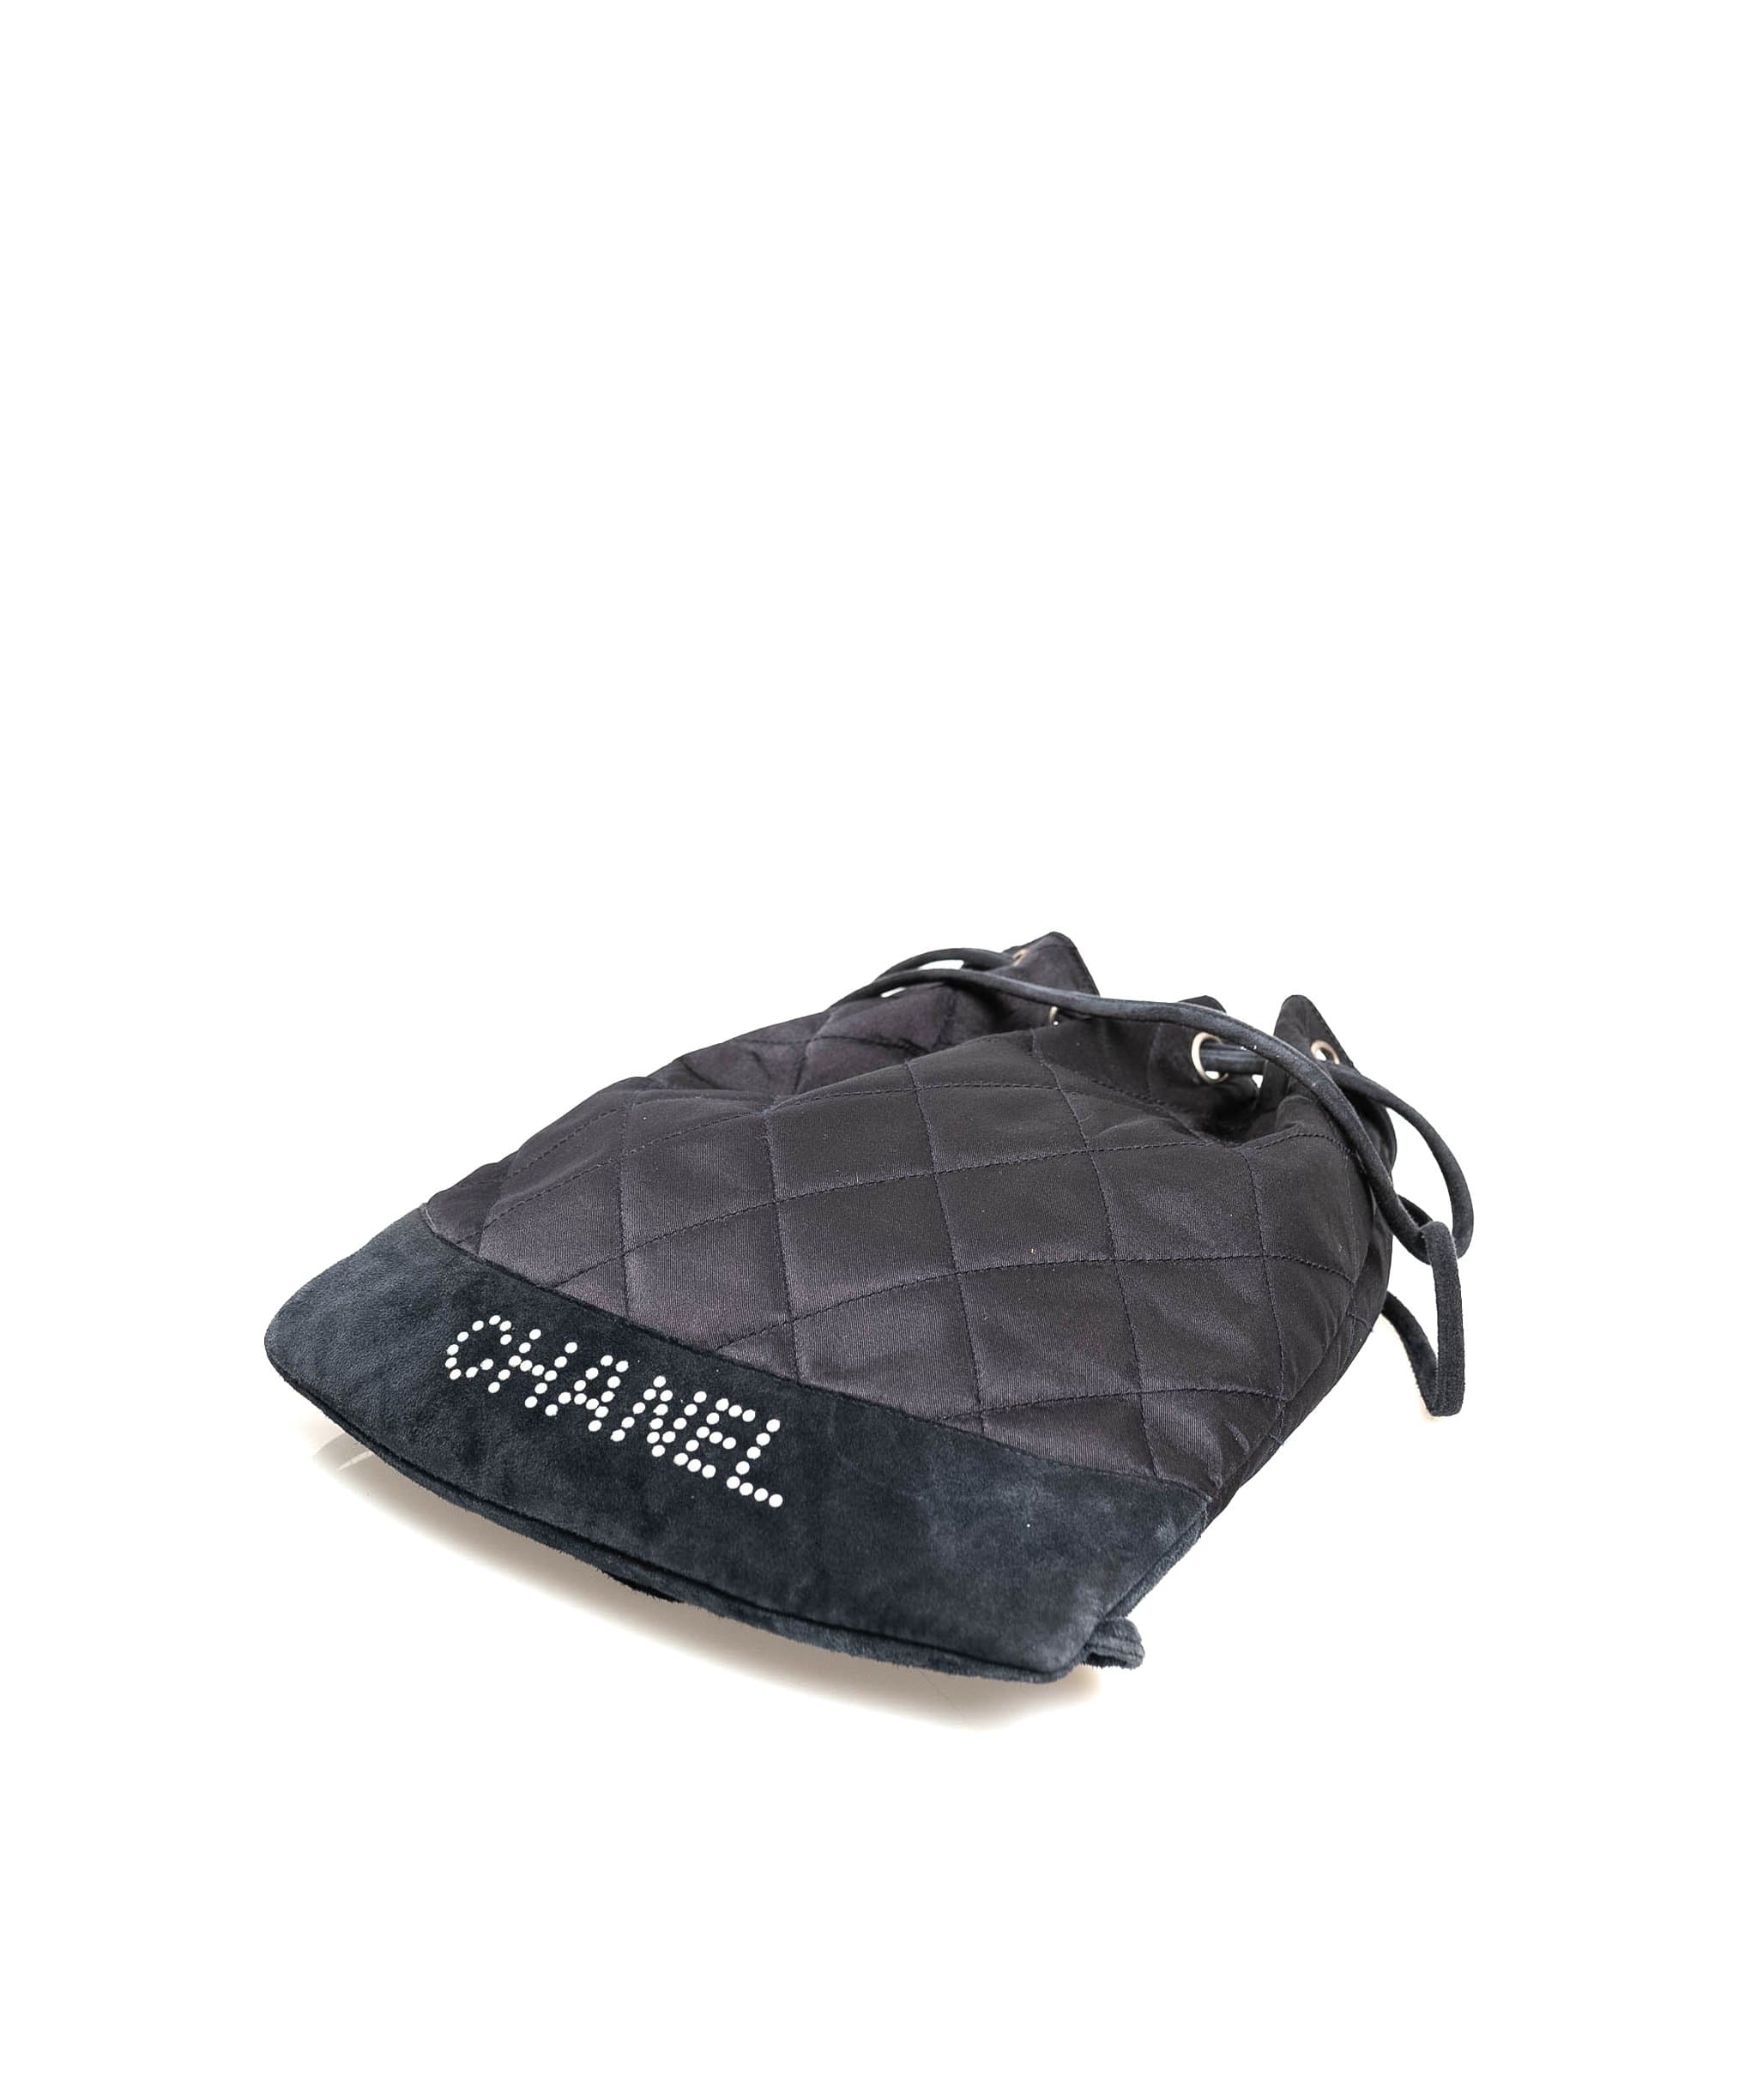 Chanel CHANEL Silk Satin Quilted Backpack - AWL1927